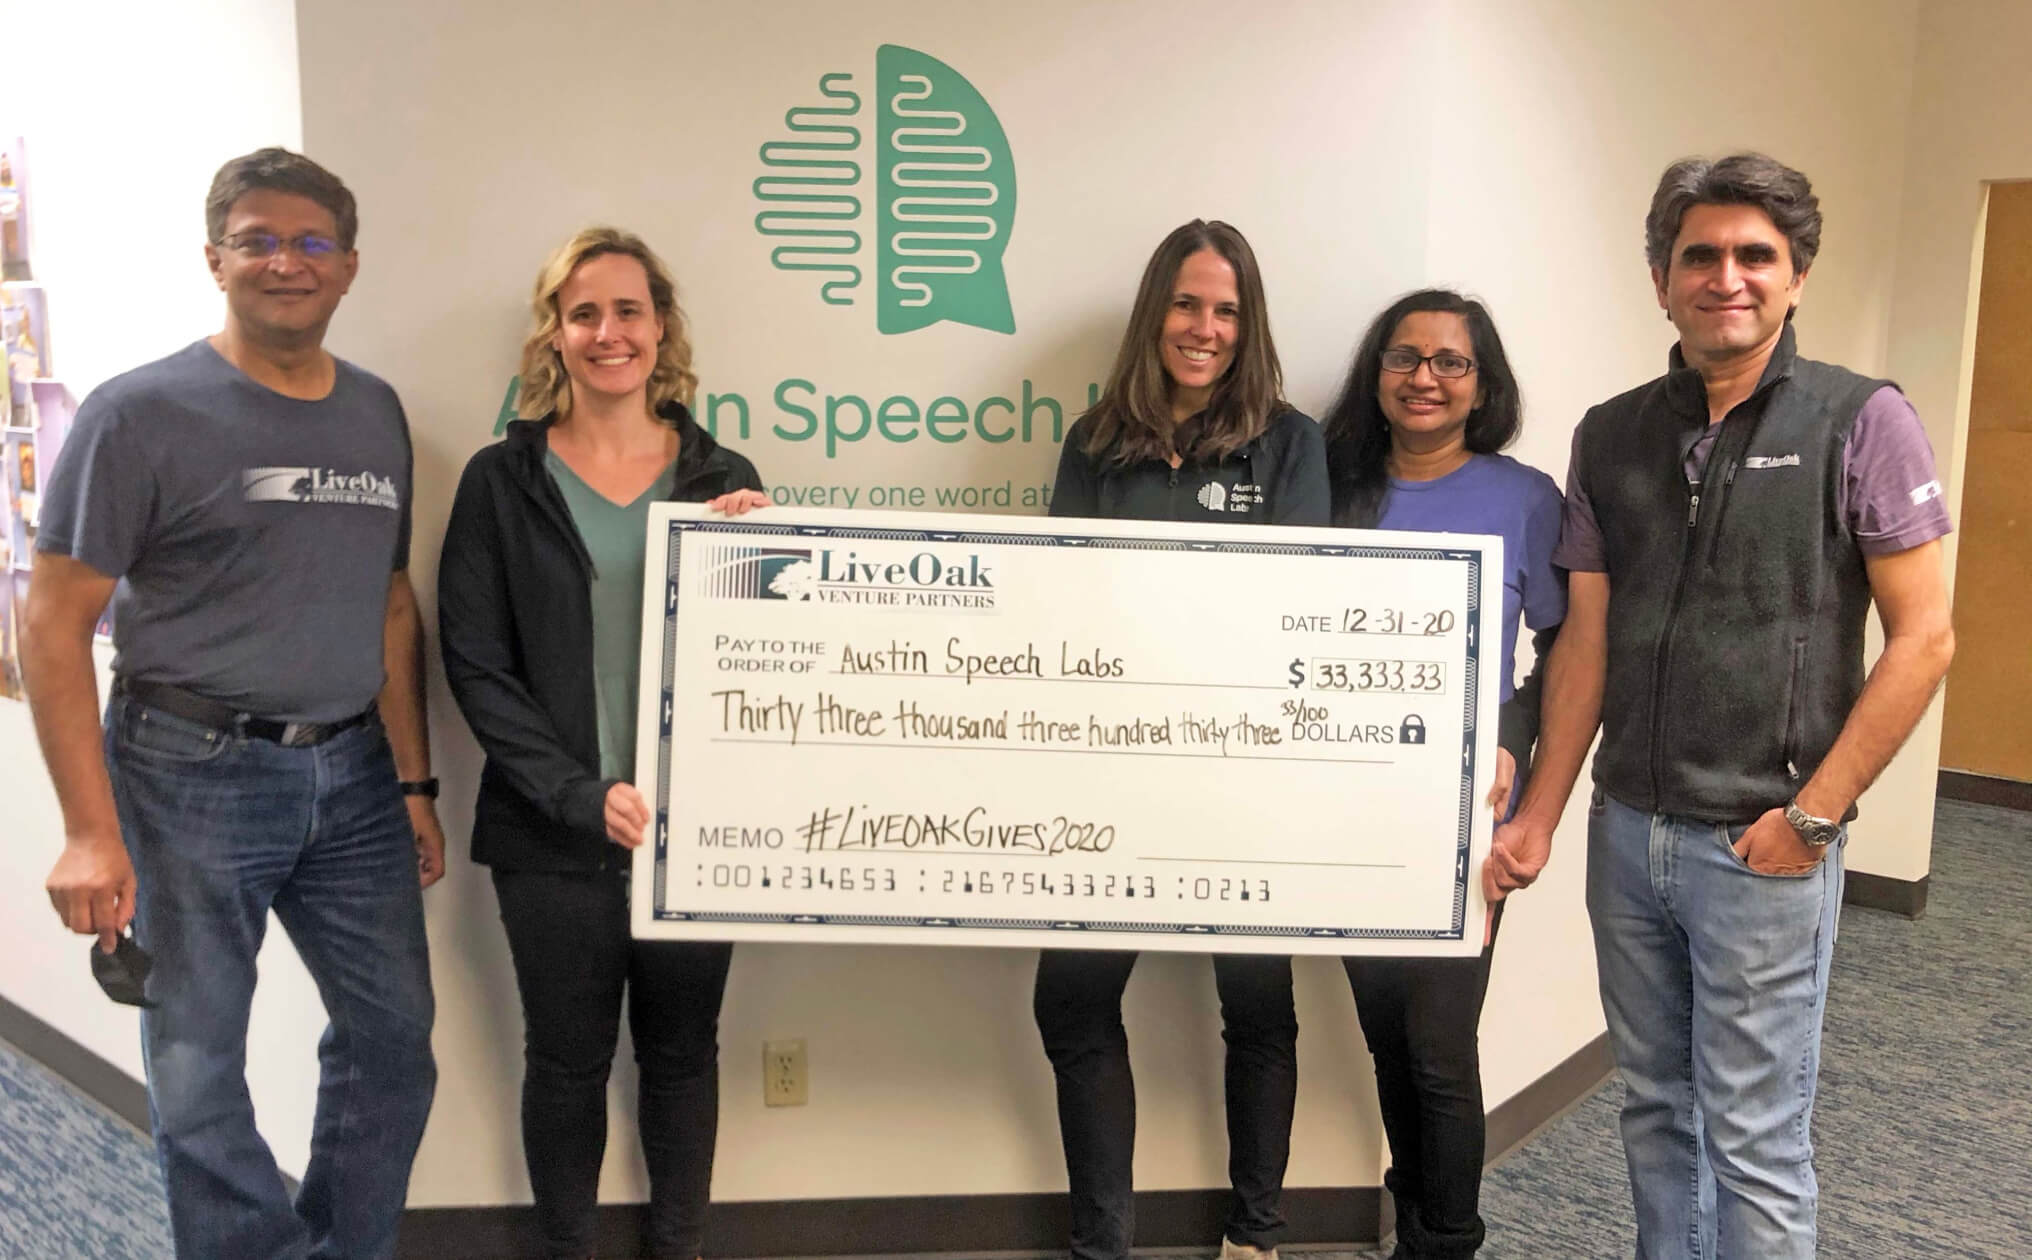 live oak gives to austin speech labs in 2019